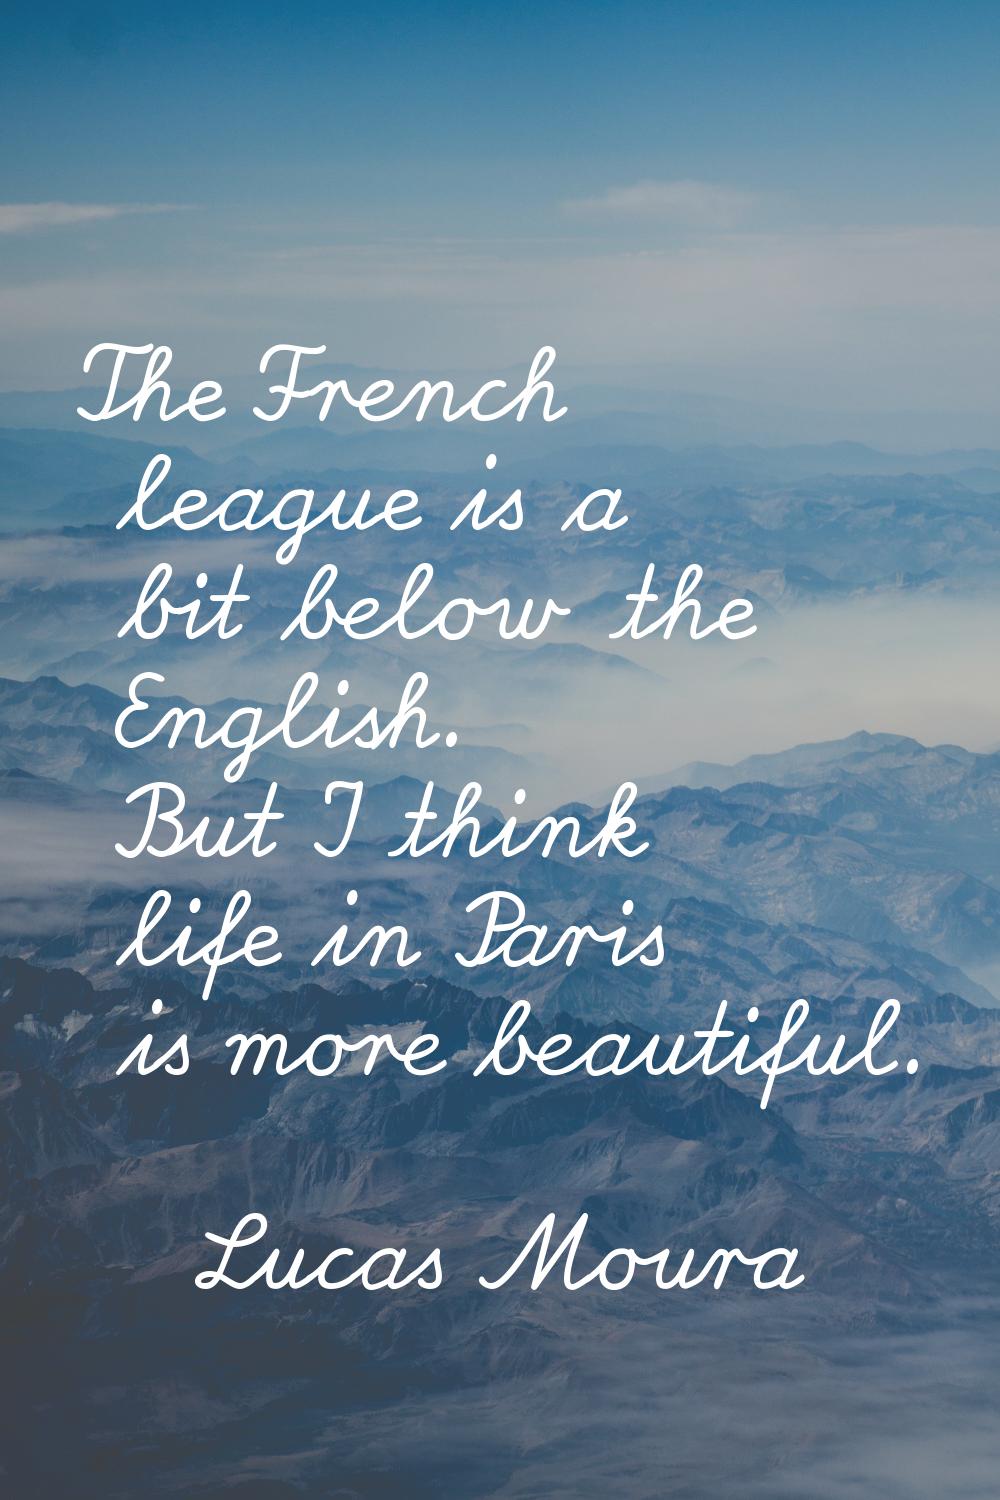 The French league is a bit below the English. But I think life in Paris is more beautiful.